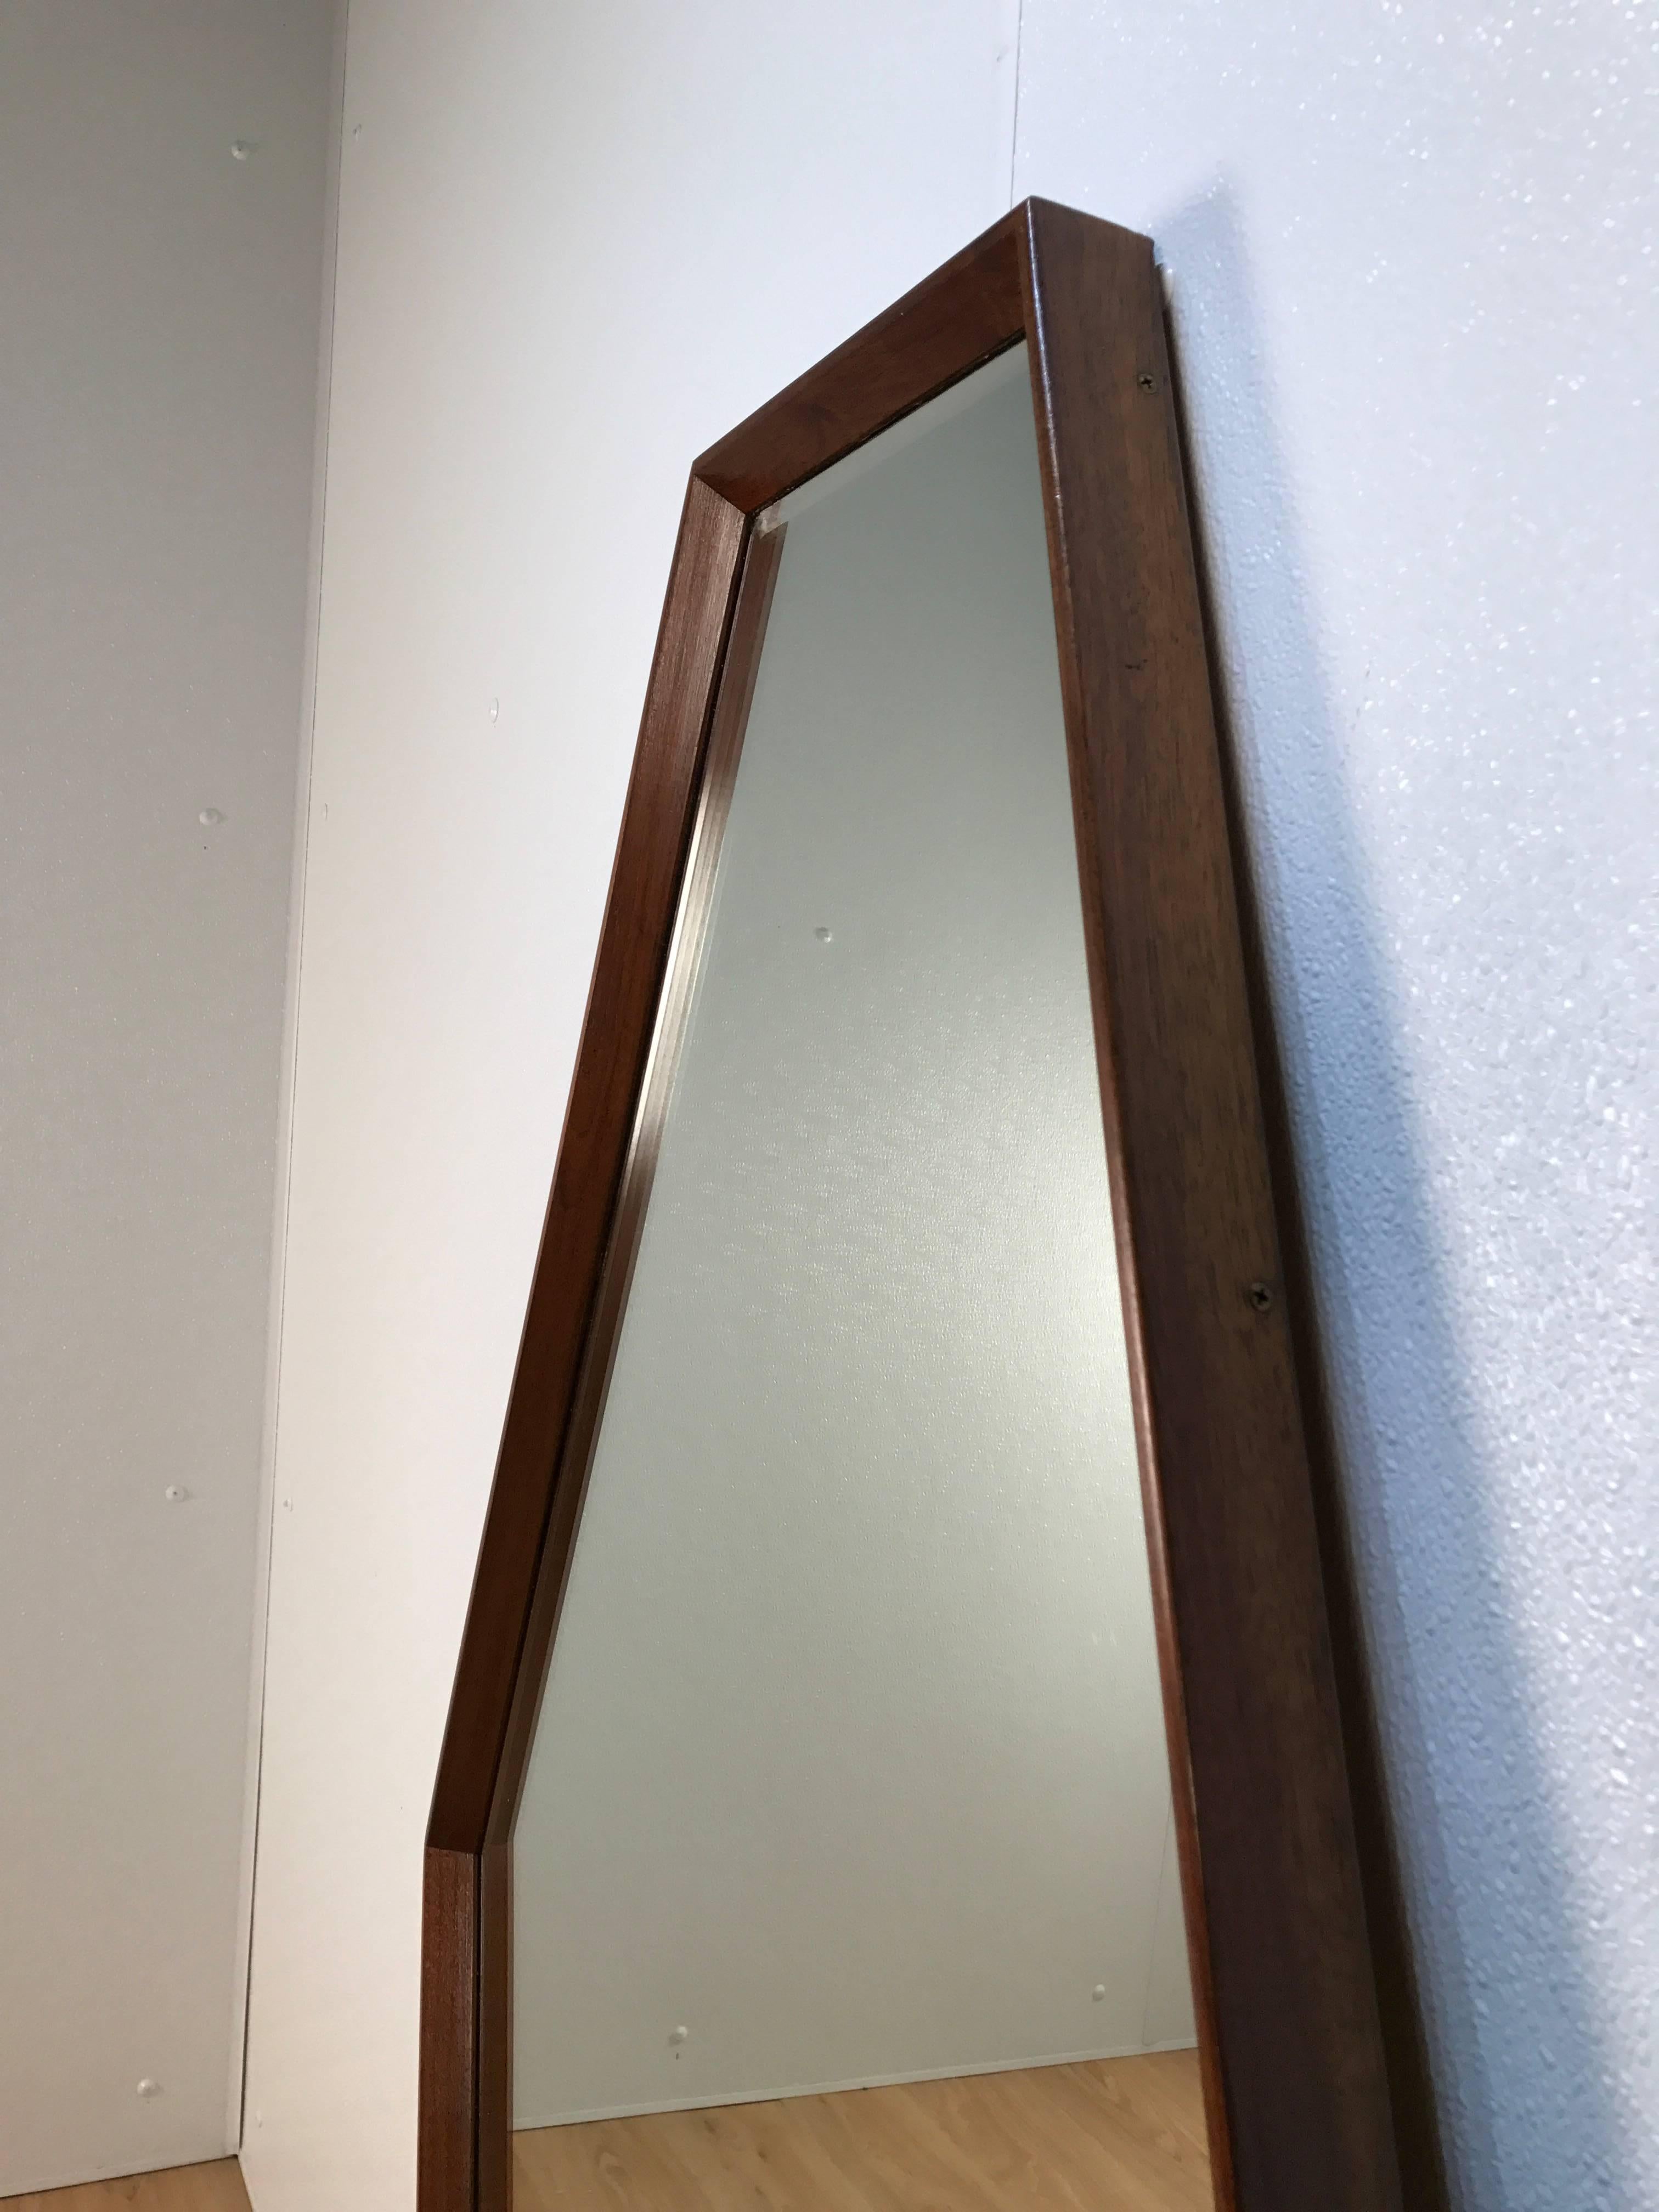 Pair of Edmond Spence hexagon mirrors, exceptional jewel like examples with bevelled mirrors.